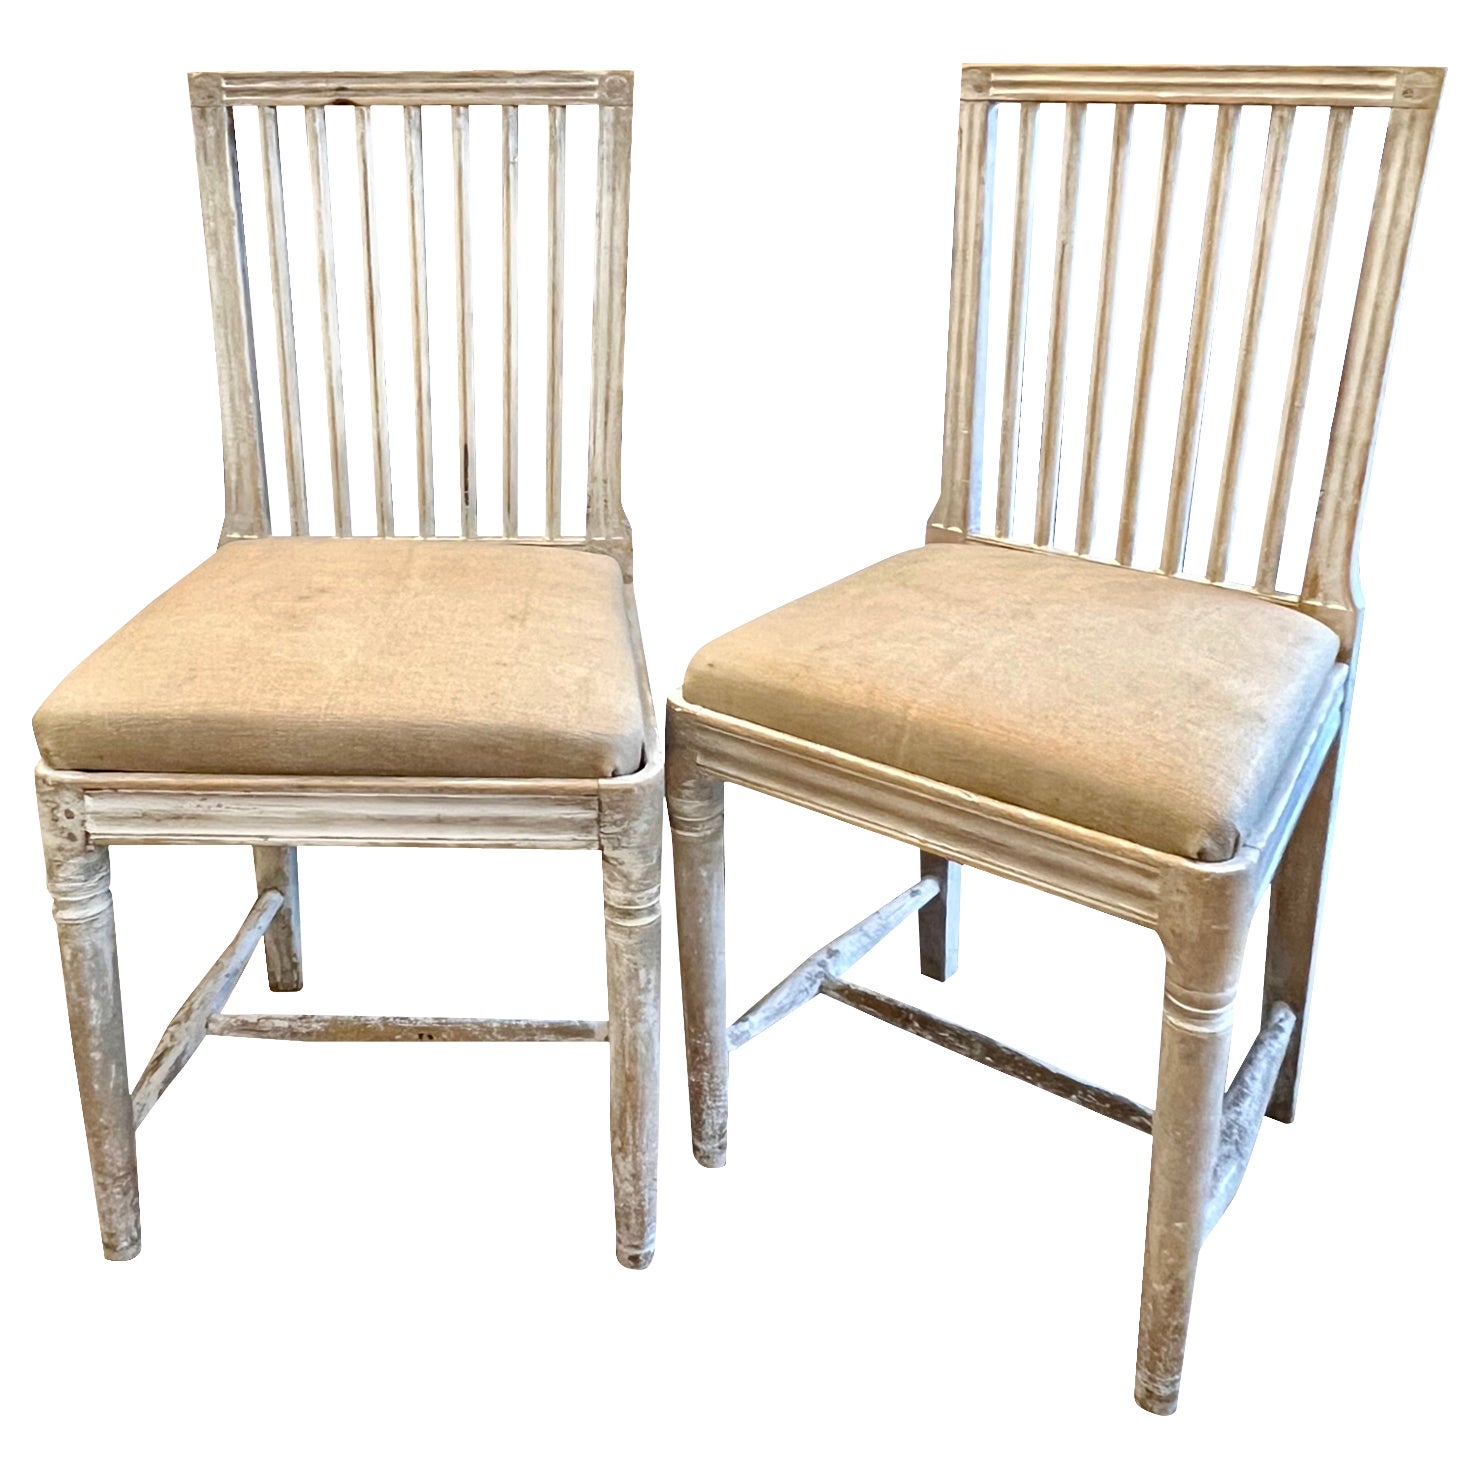 Pair of Early 19th century Swedish Chairs For Sale